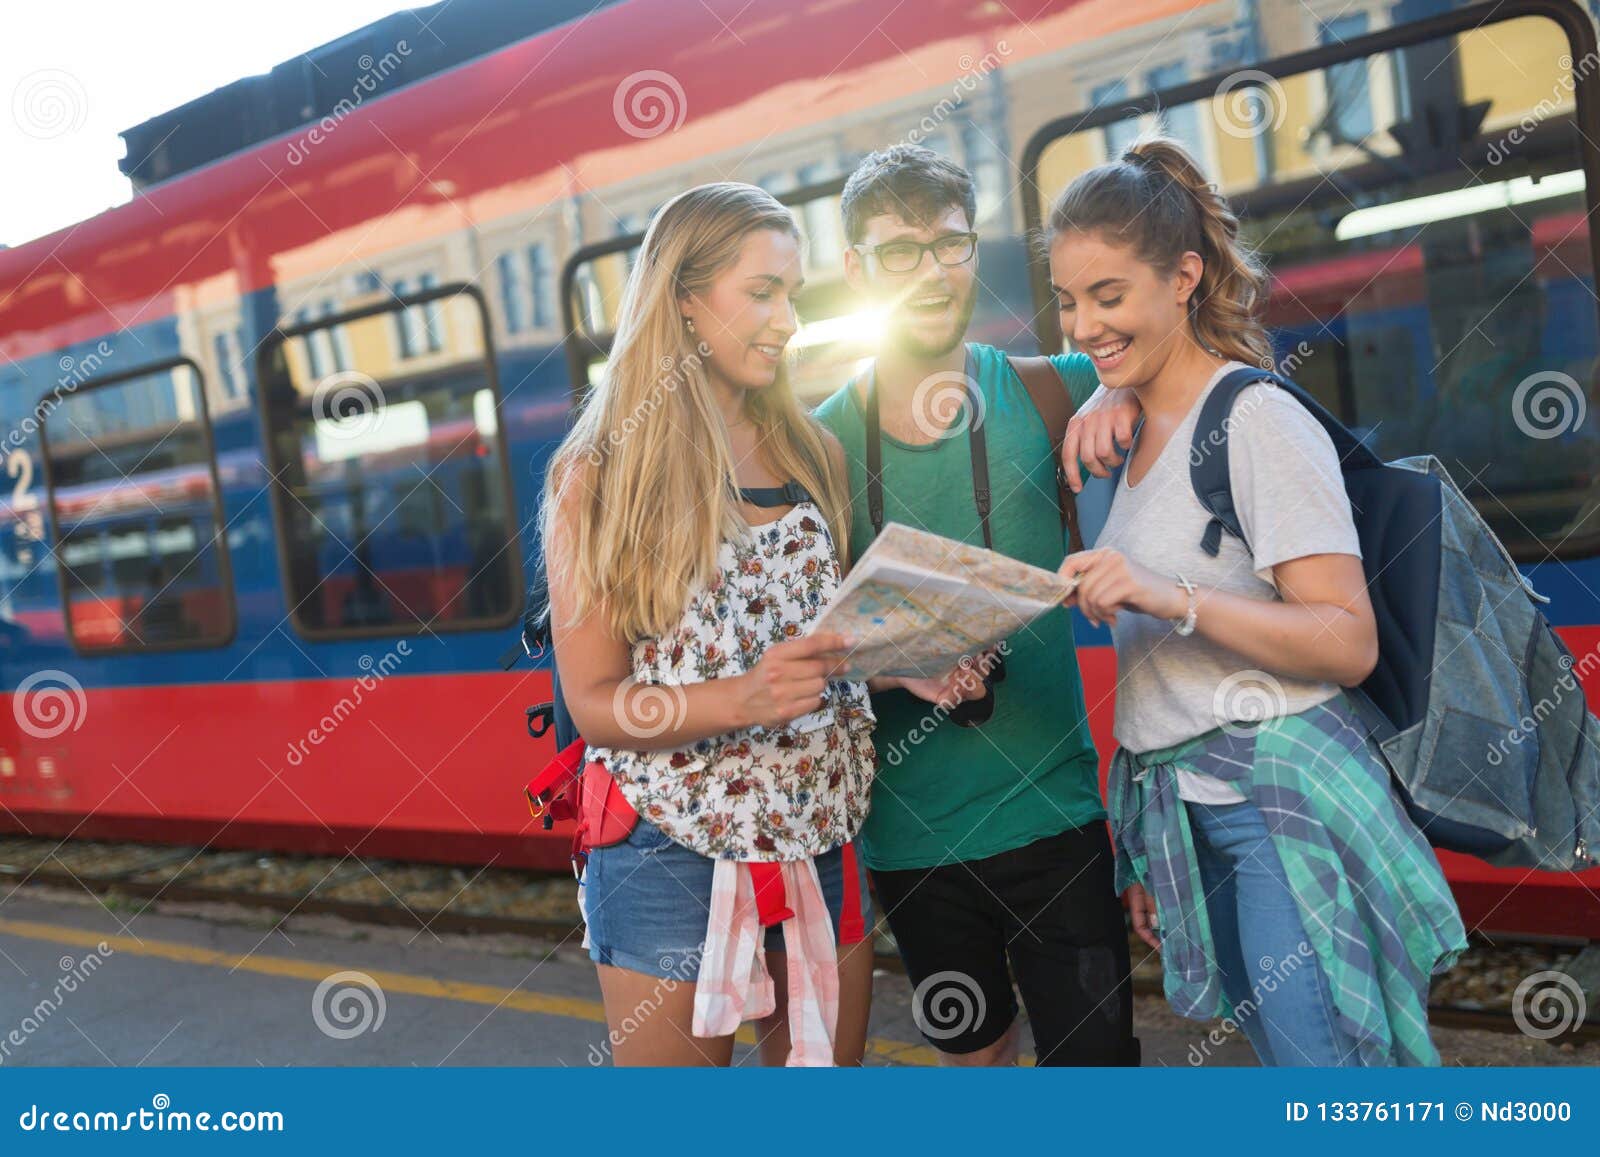 young group of travelling tourists